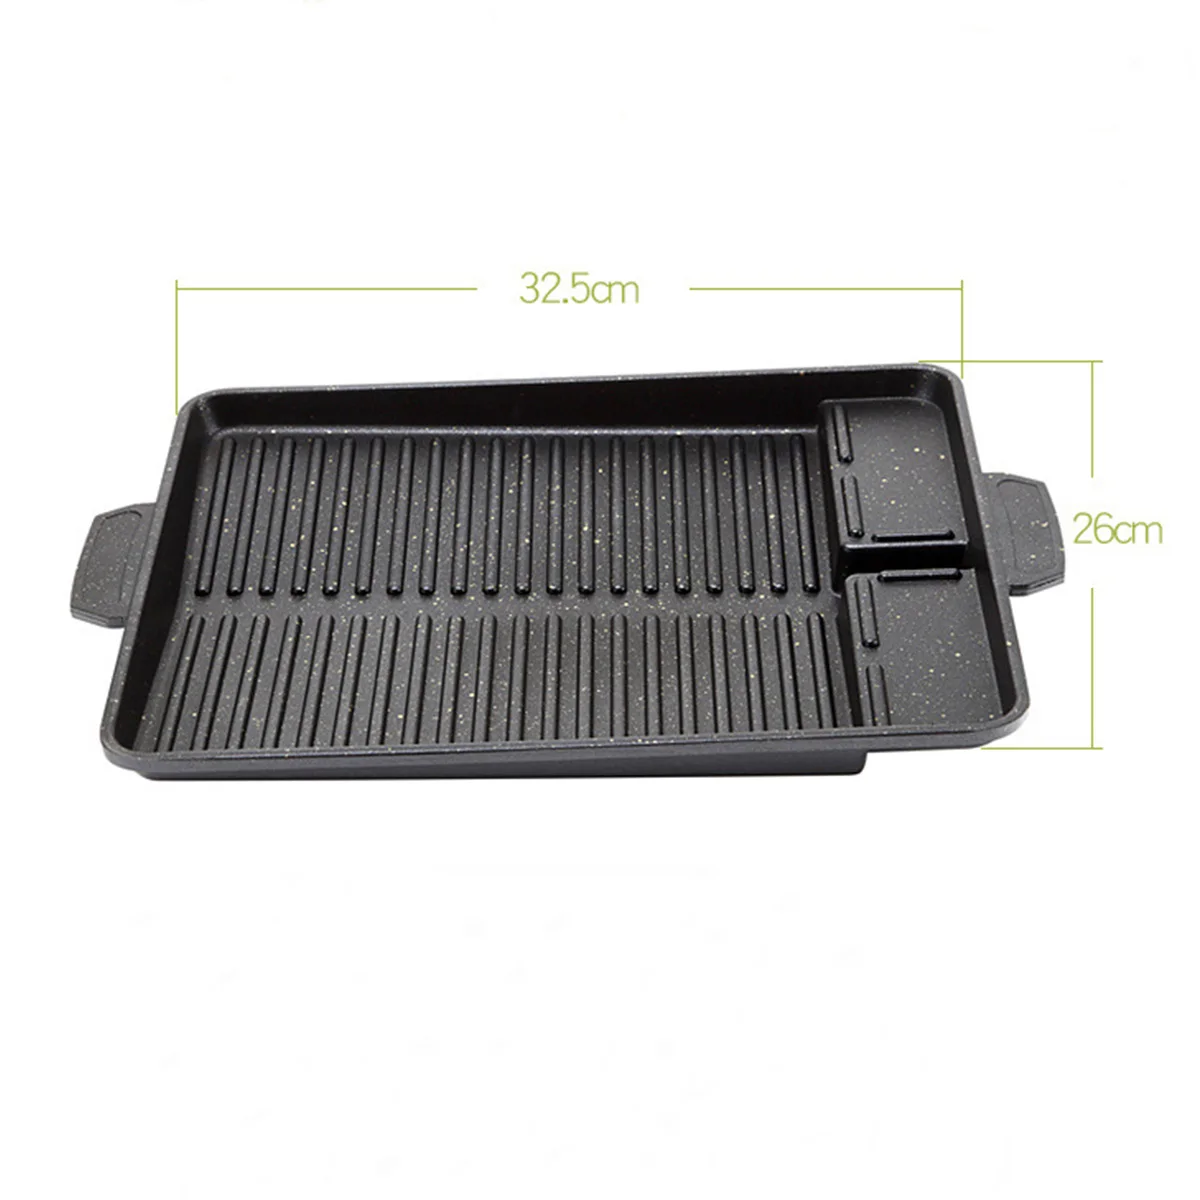 

Portable Korean BBQ Grill Pan Non-Stick Charcoal Grill Plate Butane Gas Stove Cooker Party Picnic Terrace Beach Barbecue Tray